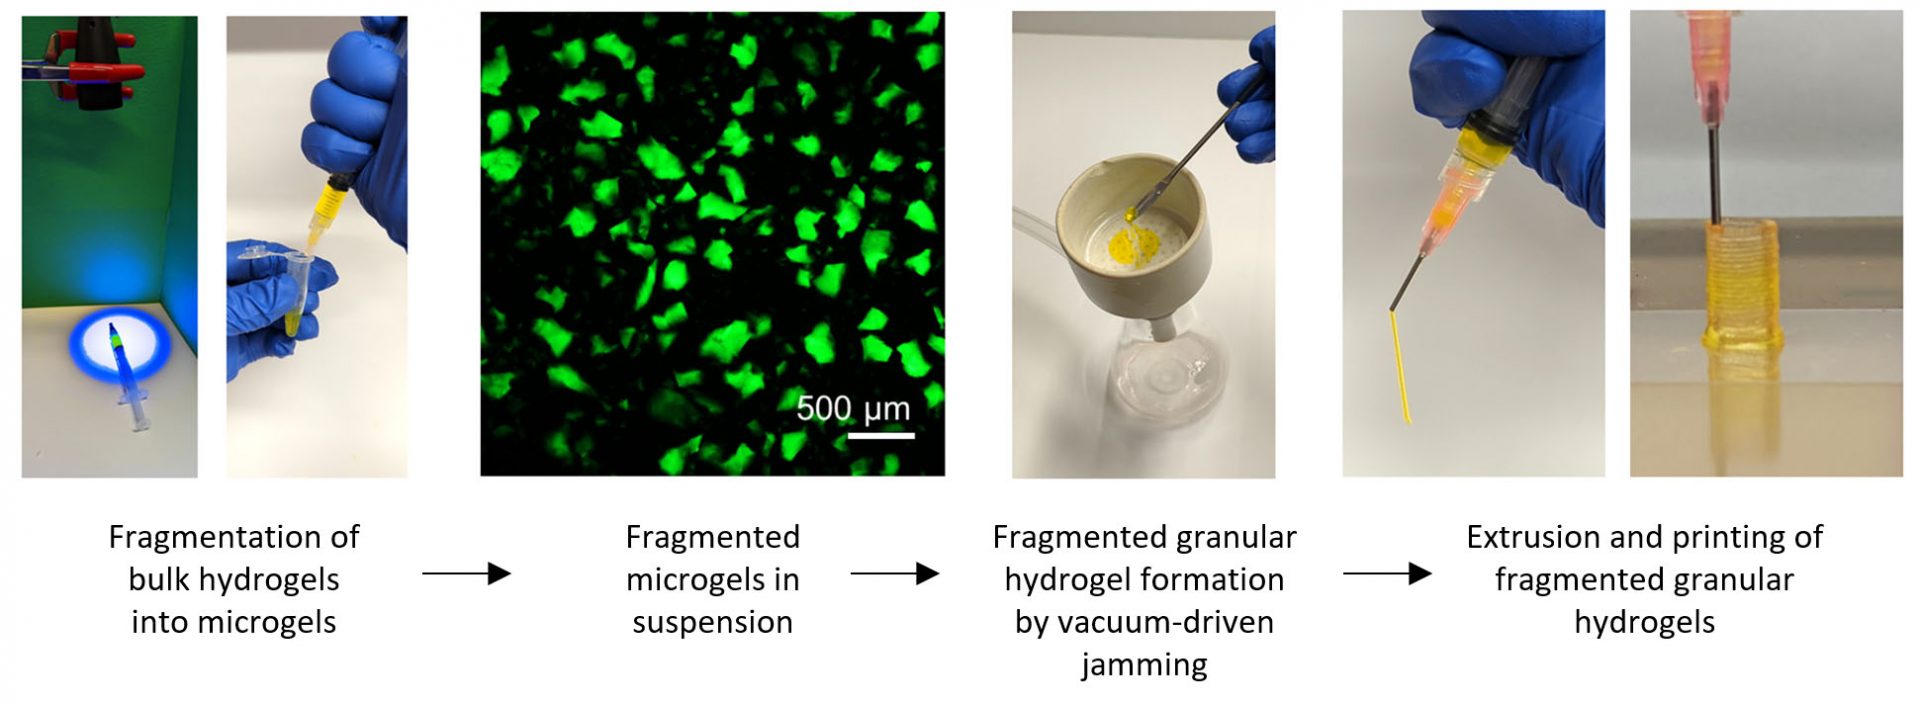 Fragmentation of bulk hydrogels into microgels -to- Fragmented microgels in suspension -to- Fragmented granular hydrogel formation by vacuum-driven jamming -to- Extrusion and printing of fragmented granular hydrogels